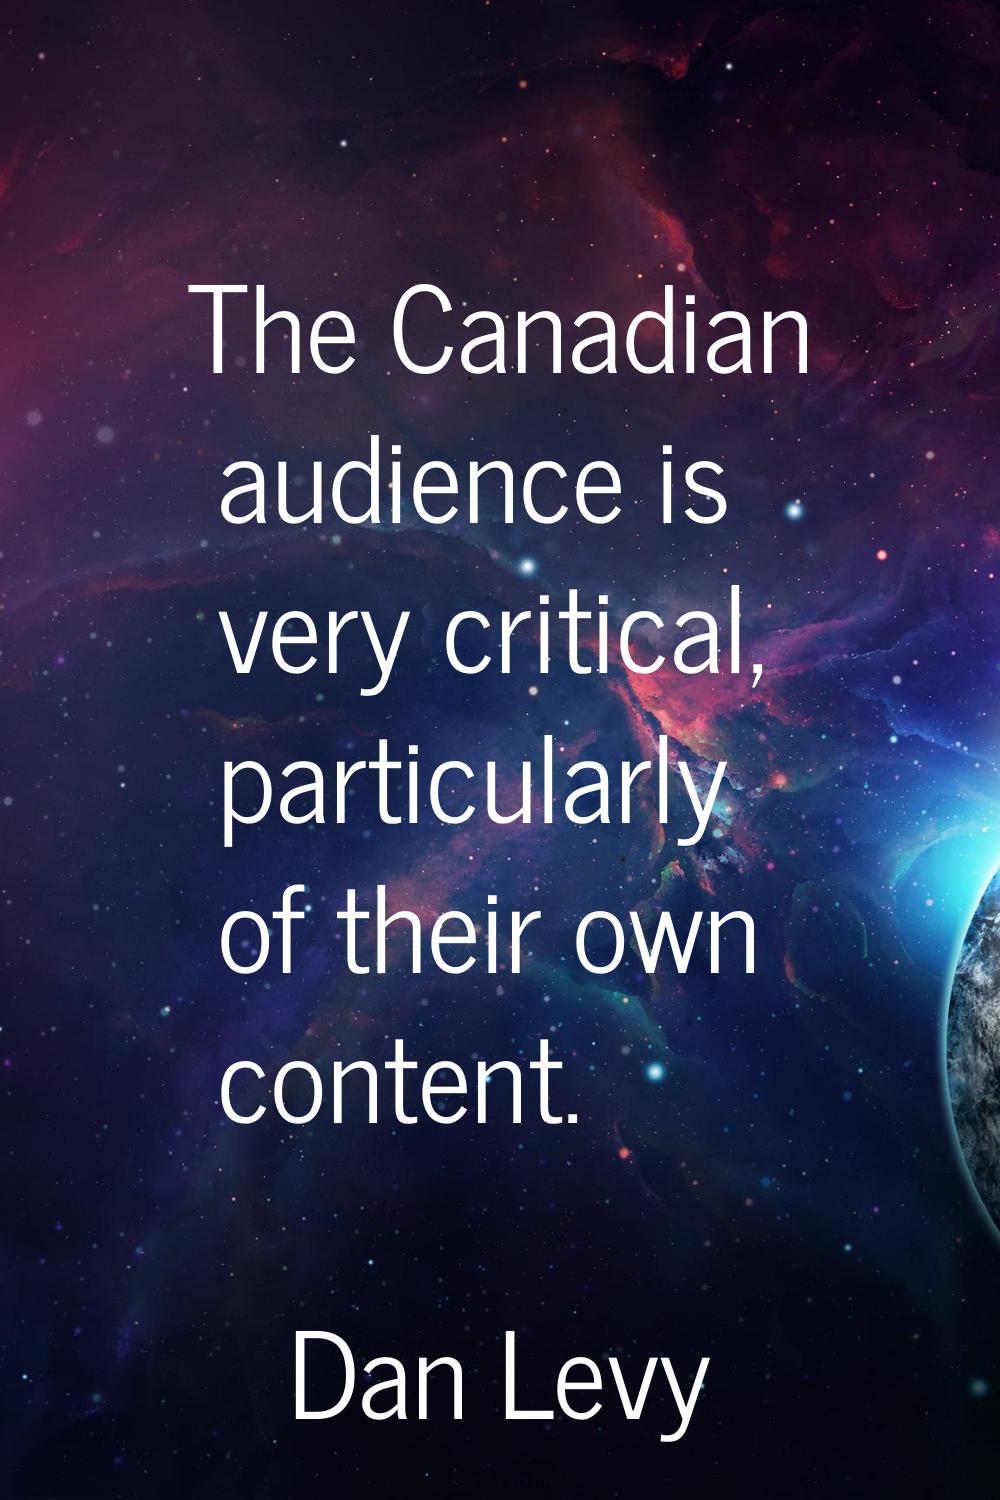 The Canadian audience is very critical, particularly of their own content.